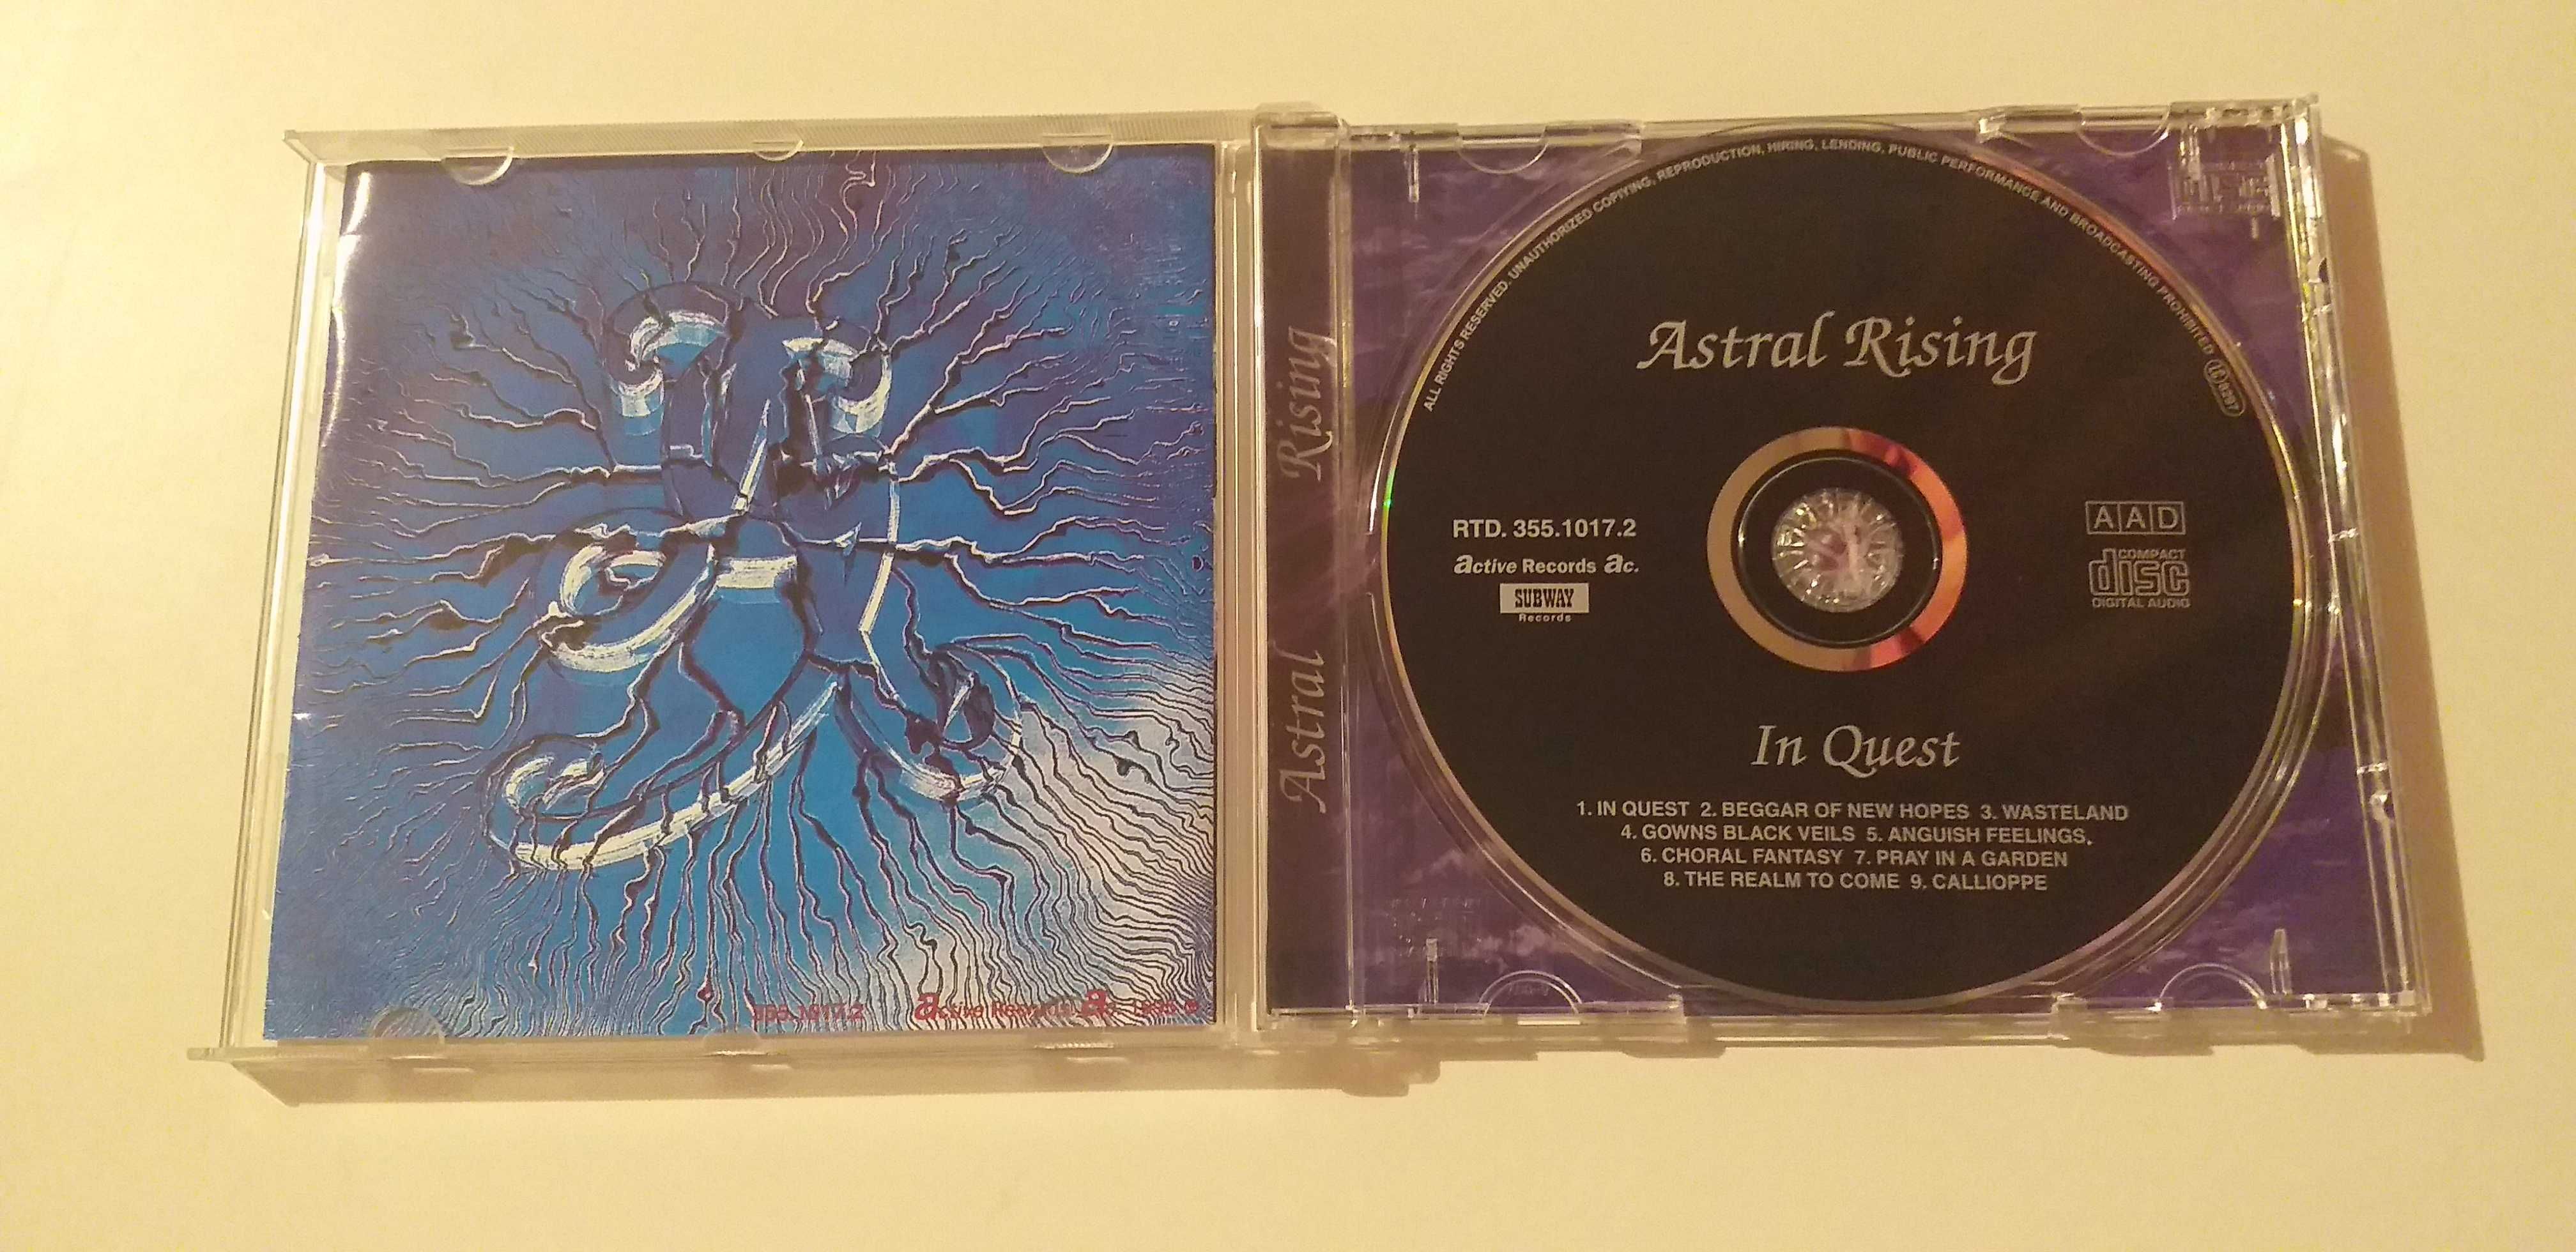 Astral Rising - " In Quest " - CD - portes incluidos